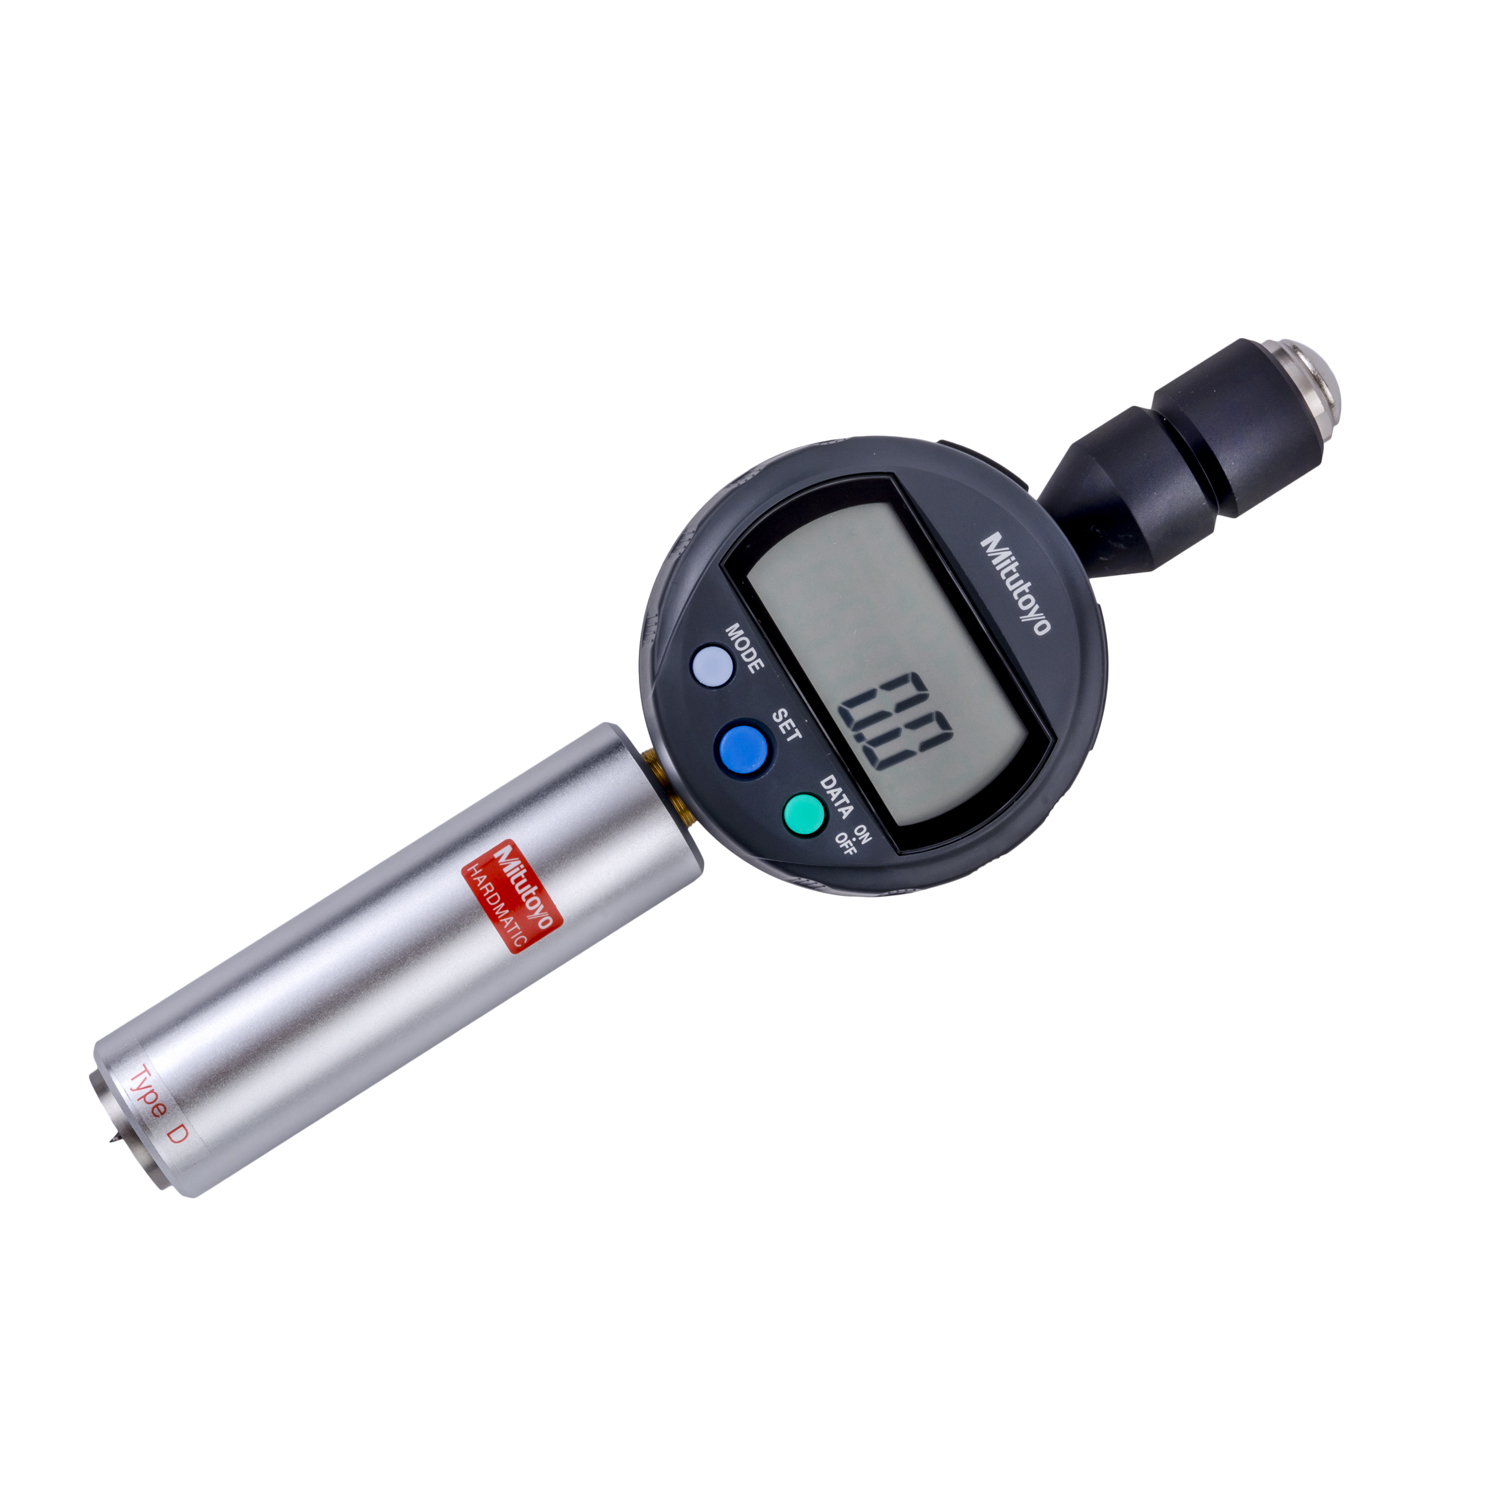 Mitotoyo, Hardmatic HH-300 - Series 811 - Durometers for Rubber and Plastics